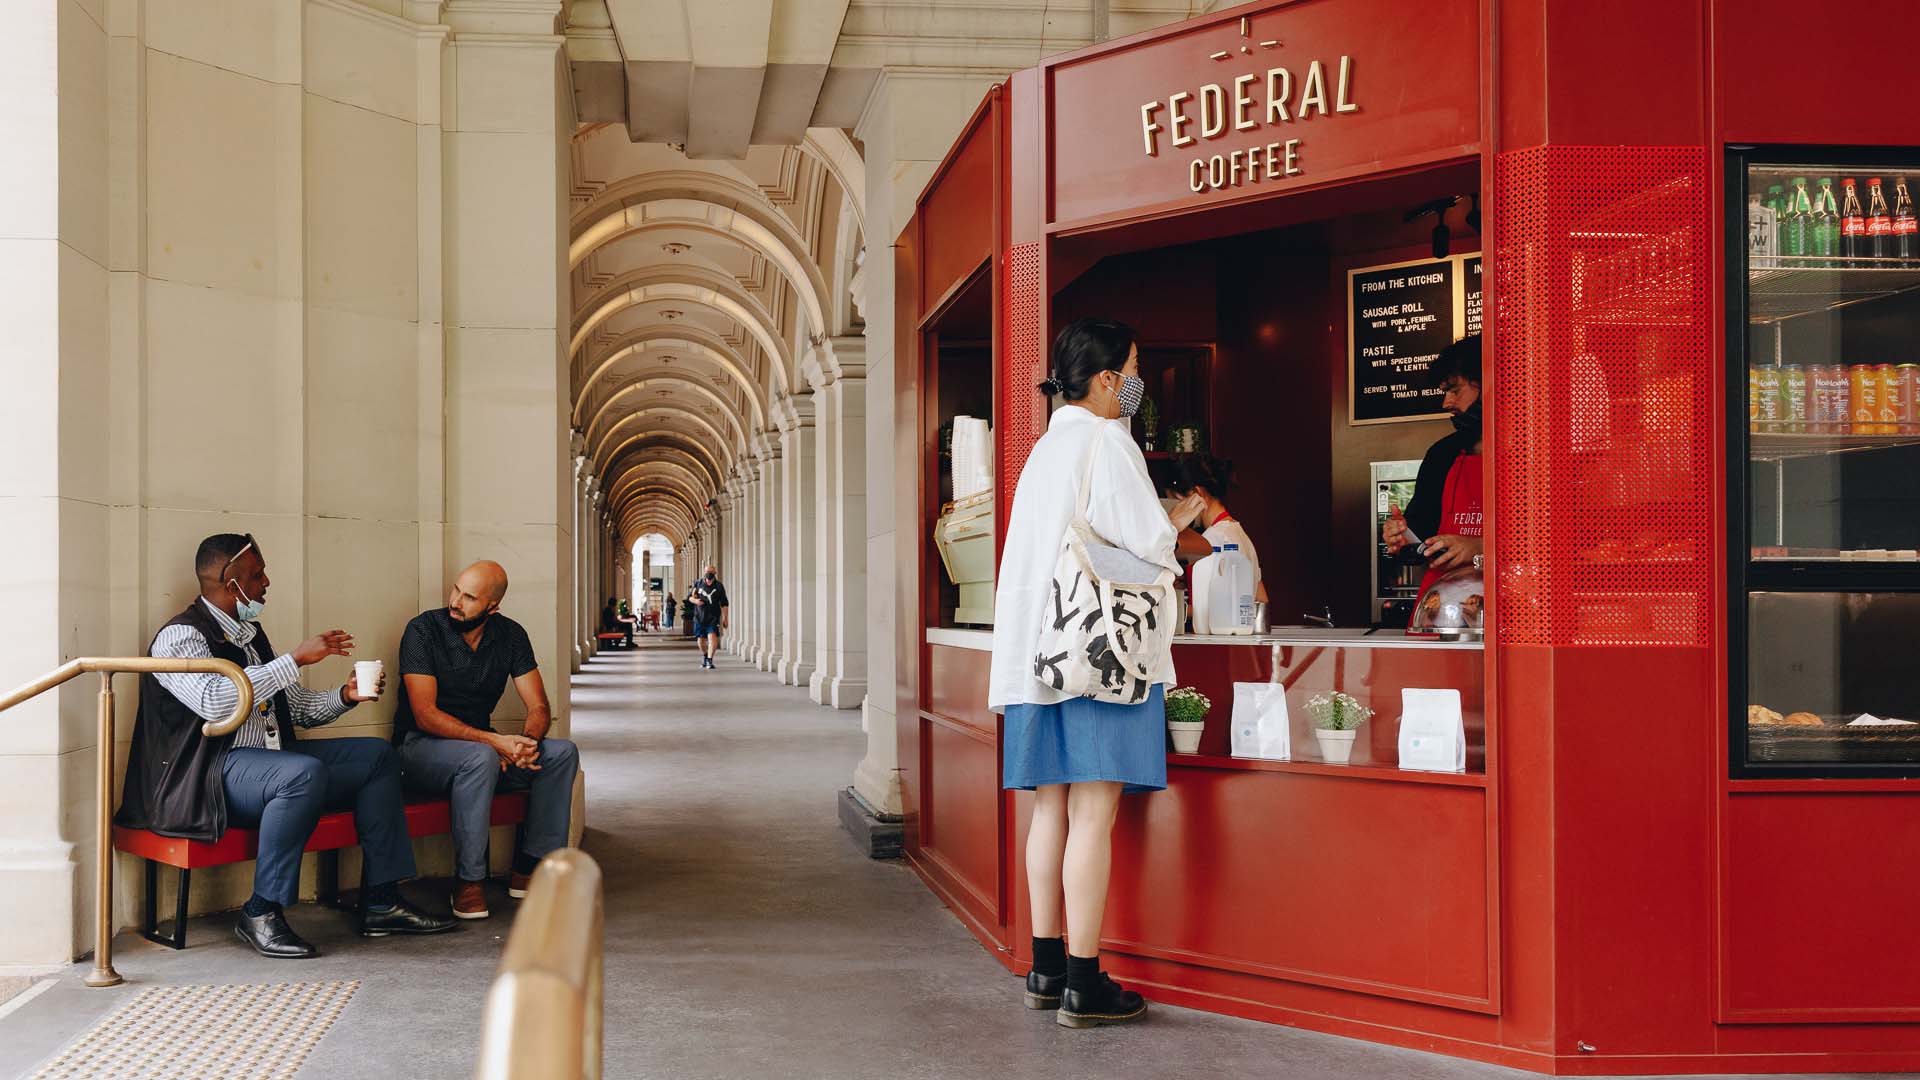 Free Coffee at Federal Coffee